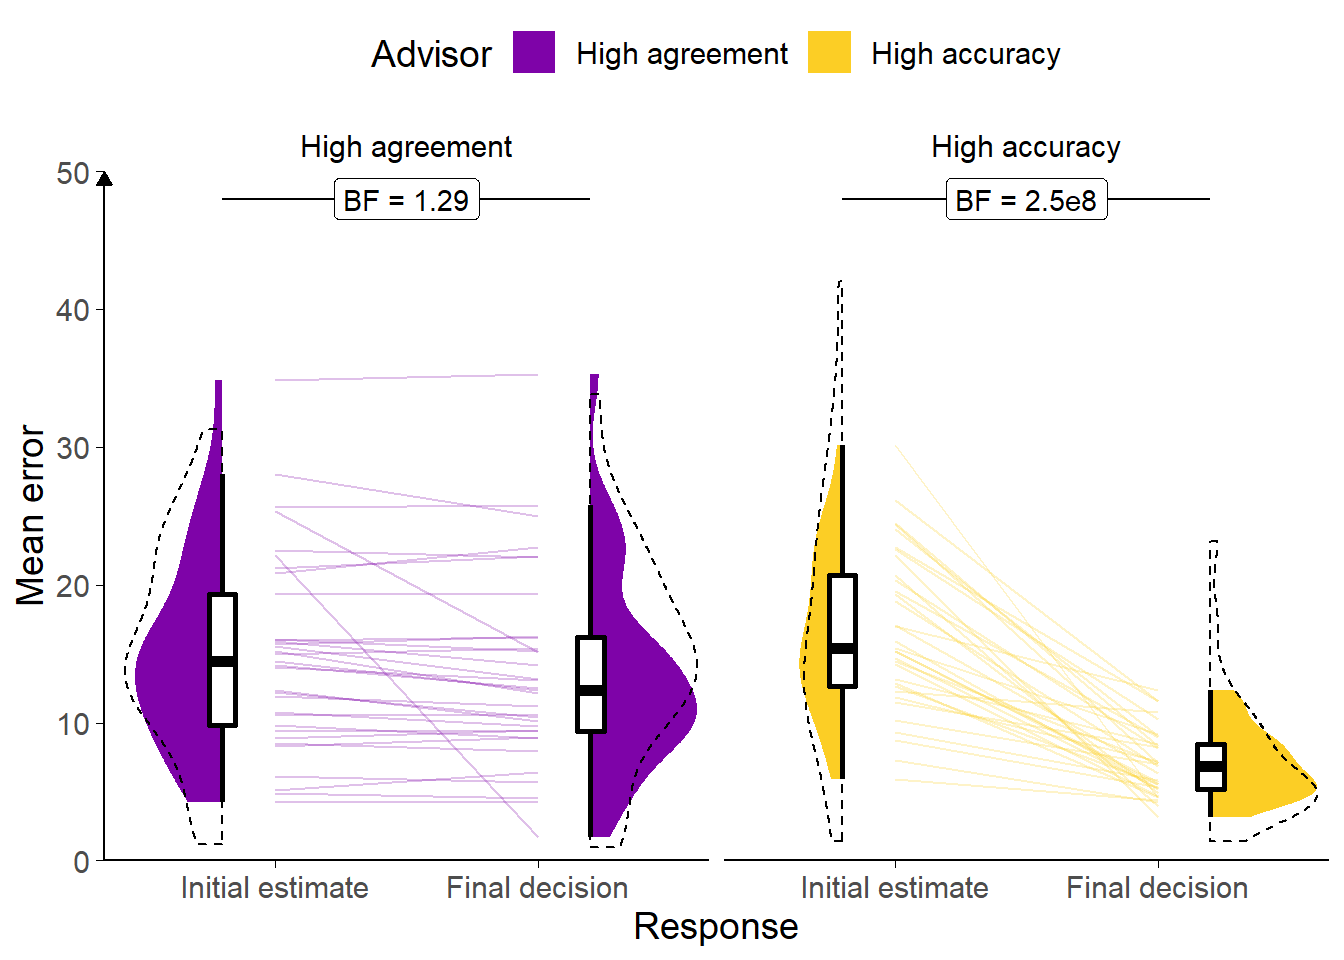 Response error for the Dates task with accurate versus agreeing advisors.<br/> Faint lines show individual participant mean error (the absolute difference between the participant's response and the correct answer), for which the violin and box plots show the distributions. The dashed line indicates chance performance. Dotted violin outlines show the distribution of participant means on the original study which this is a replication. The dependent variable here is error, the distance between the correct answer and the participant's answer, and consequently lower values represent better performance. The theoretical limit for error is around 100.